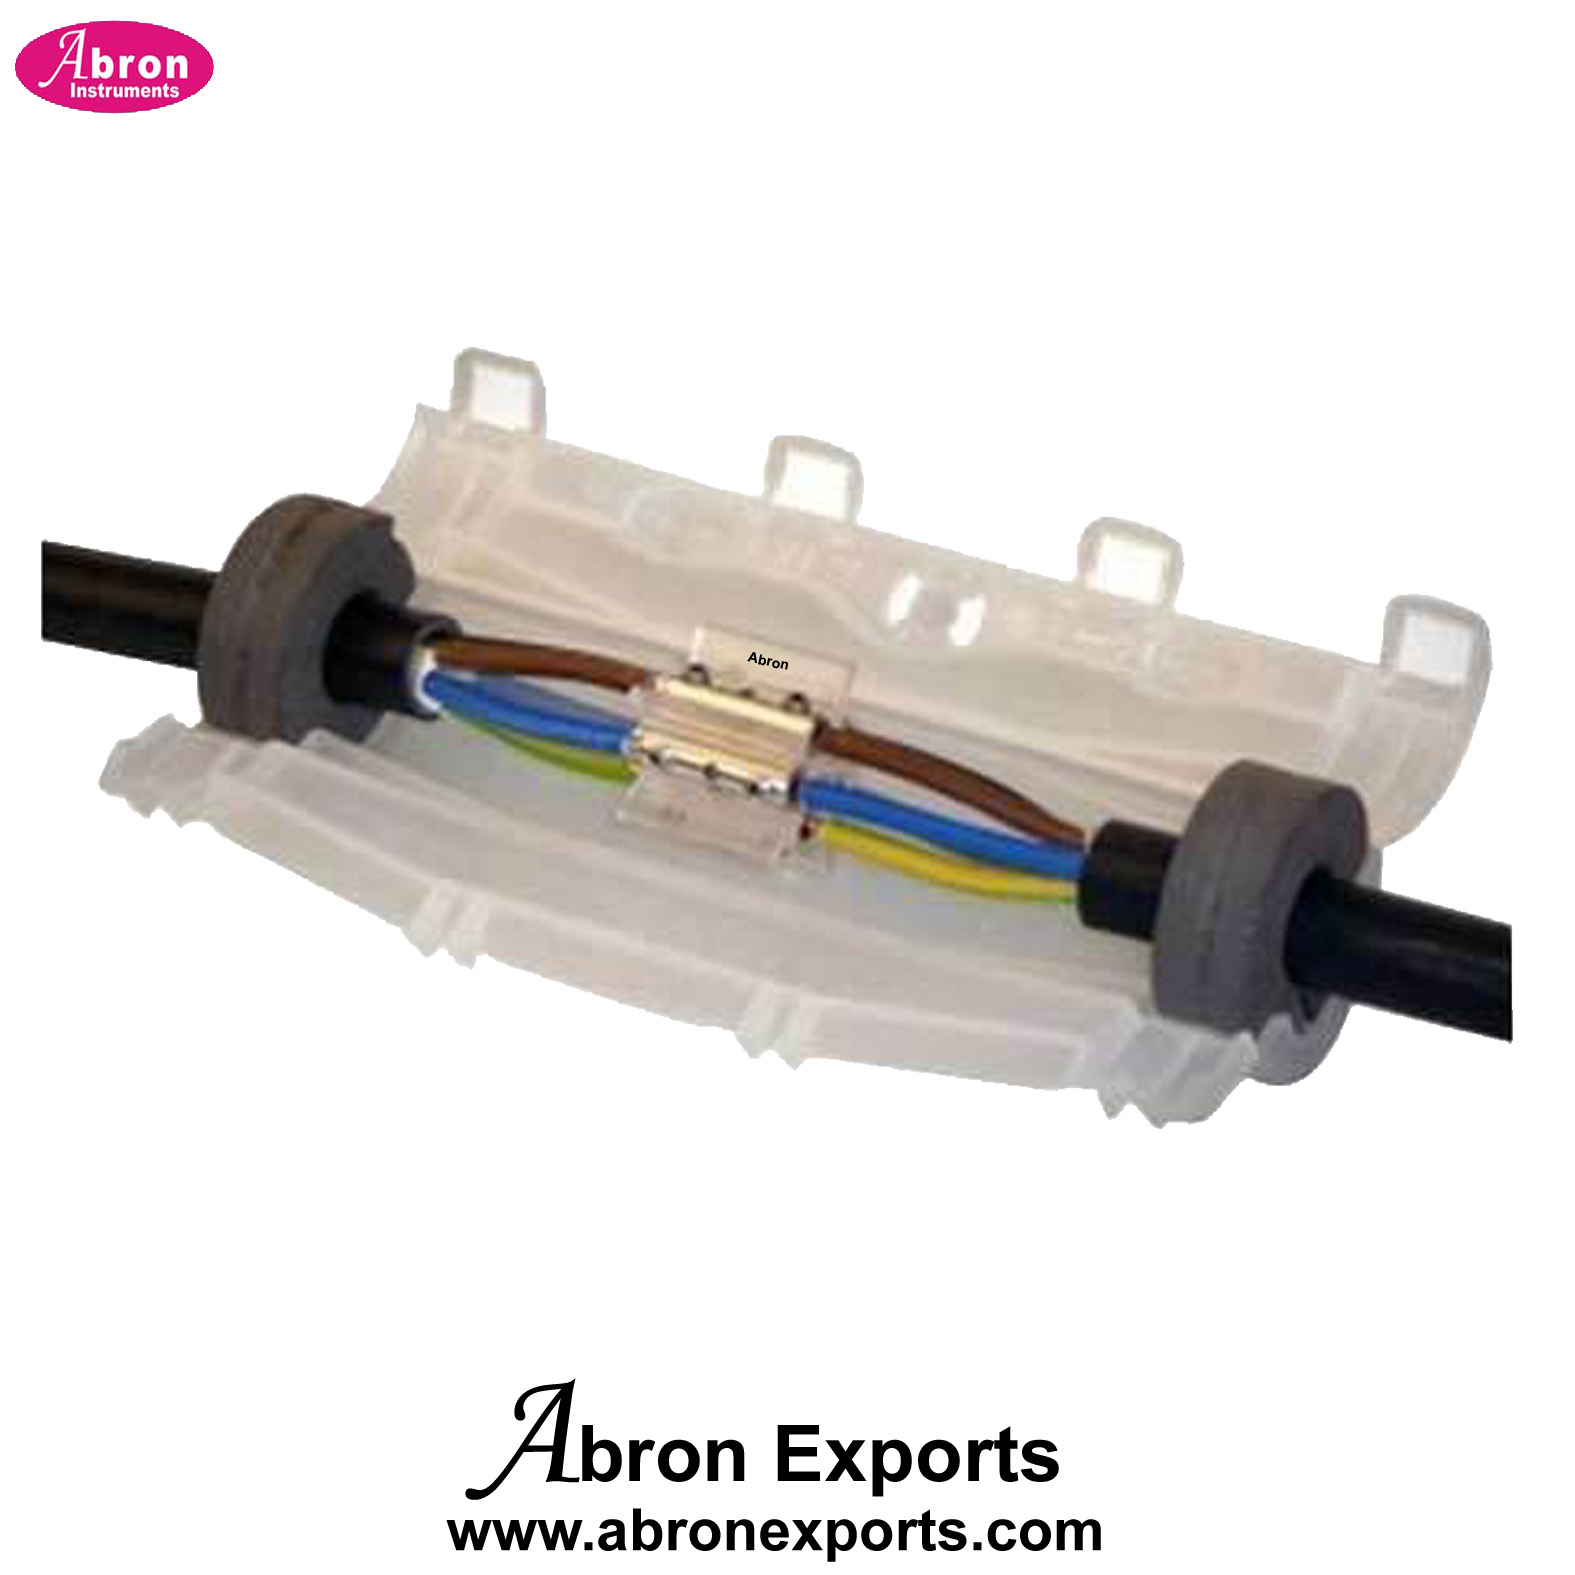 Cable Connector Wire Sets Cable Termination Fault Free Joint kit 10pc Abron  AE-1217C